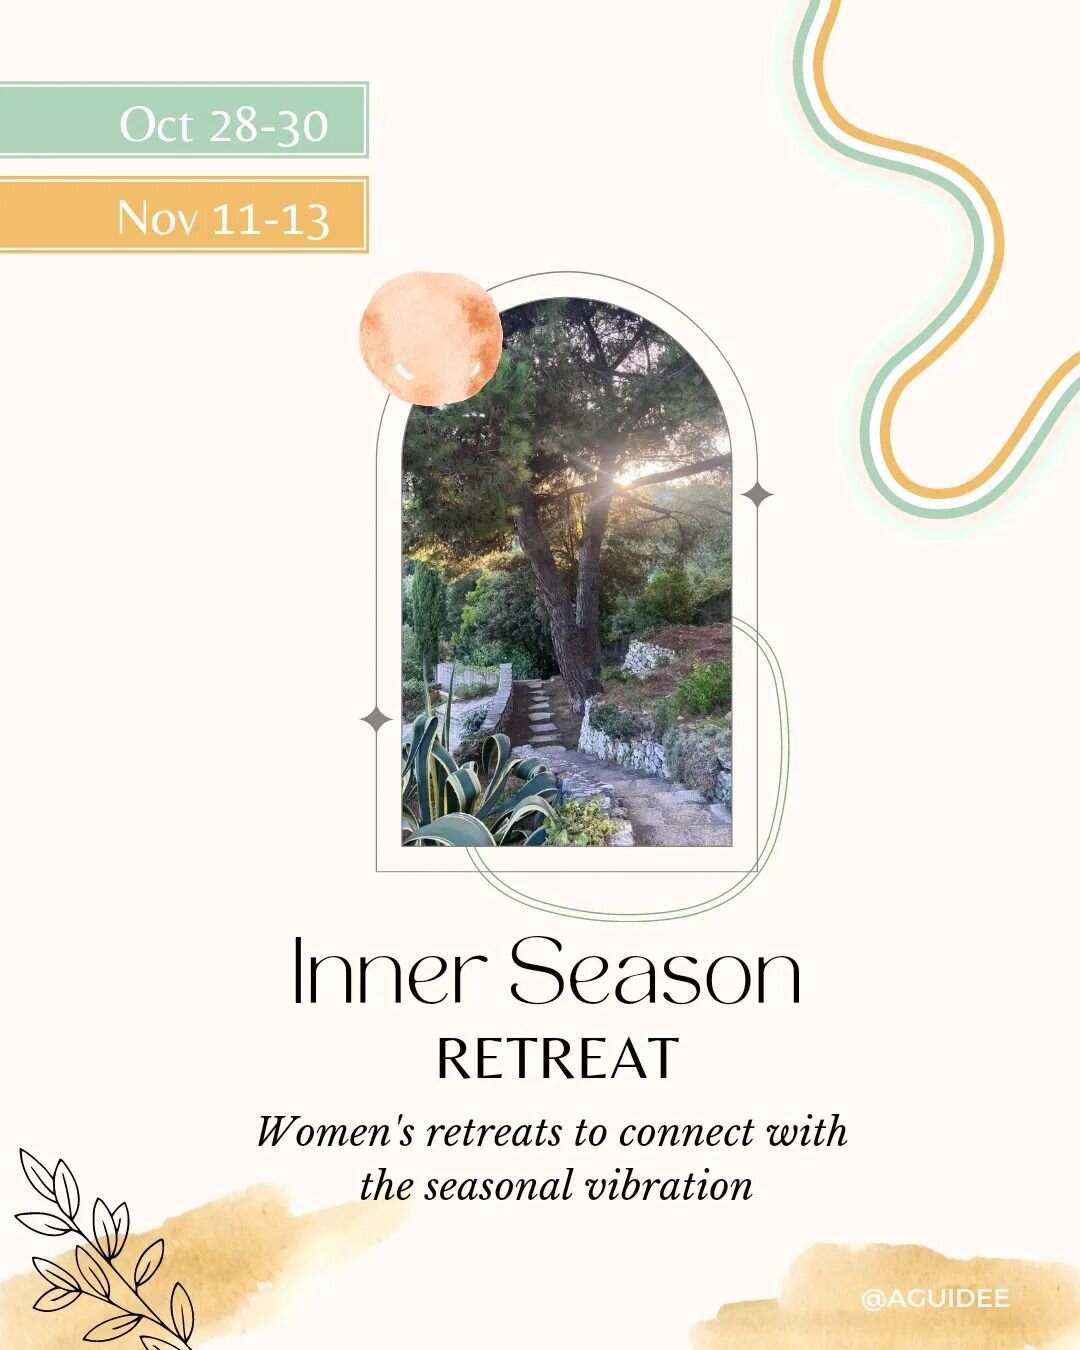 Inner Season Retreat🍁Autumn Introspective

I'm very happy to introduce you to the first Aguid&eacute;e Women's Retreat : 𝐼𝑛𝑛𝑒𝑟 𝑆𝑒𝑎𝑠𝑜𝑛. 

Women's circles ✺ Sacred ceremonies ✺ Connection to nature 

These sacred weekends are an invitation 